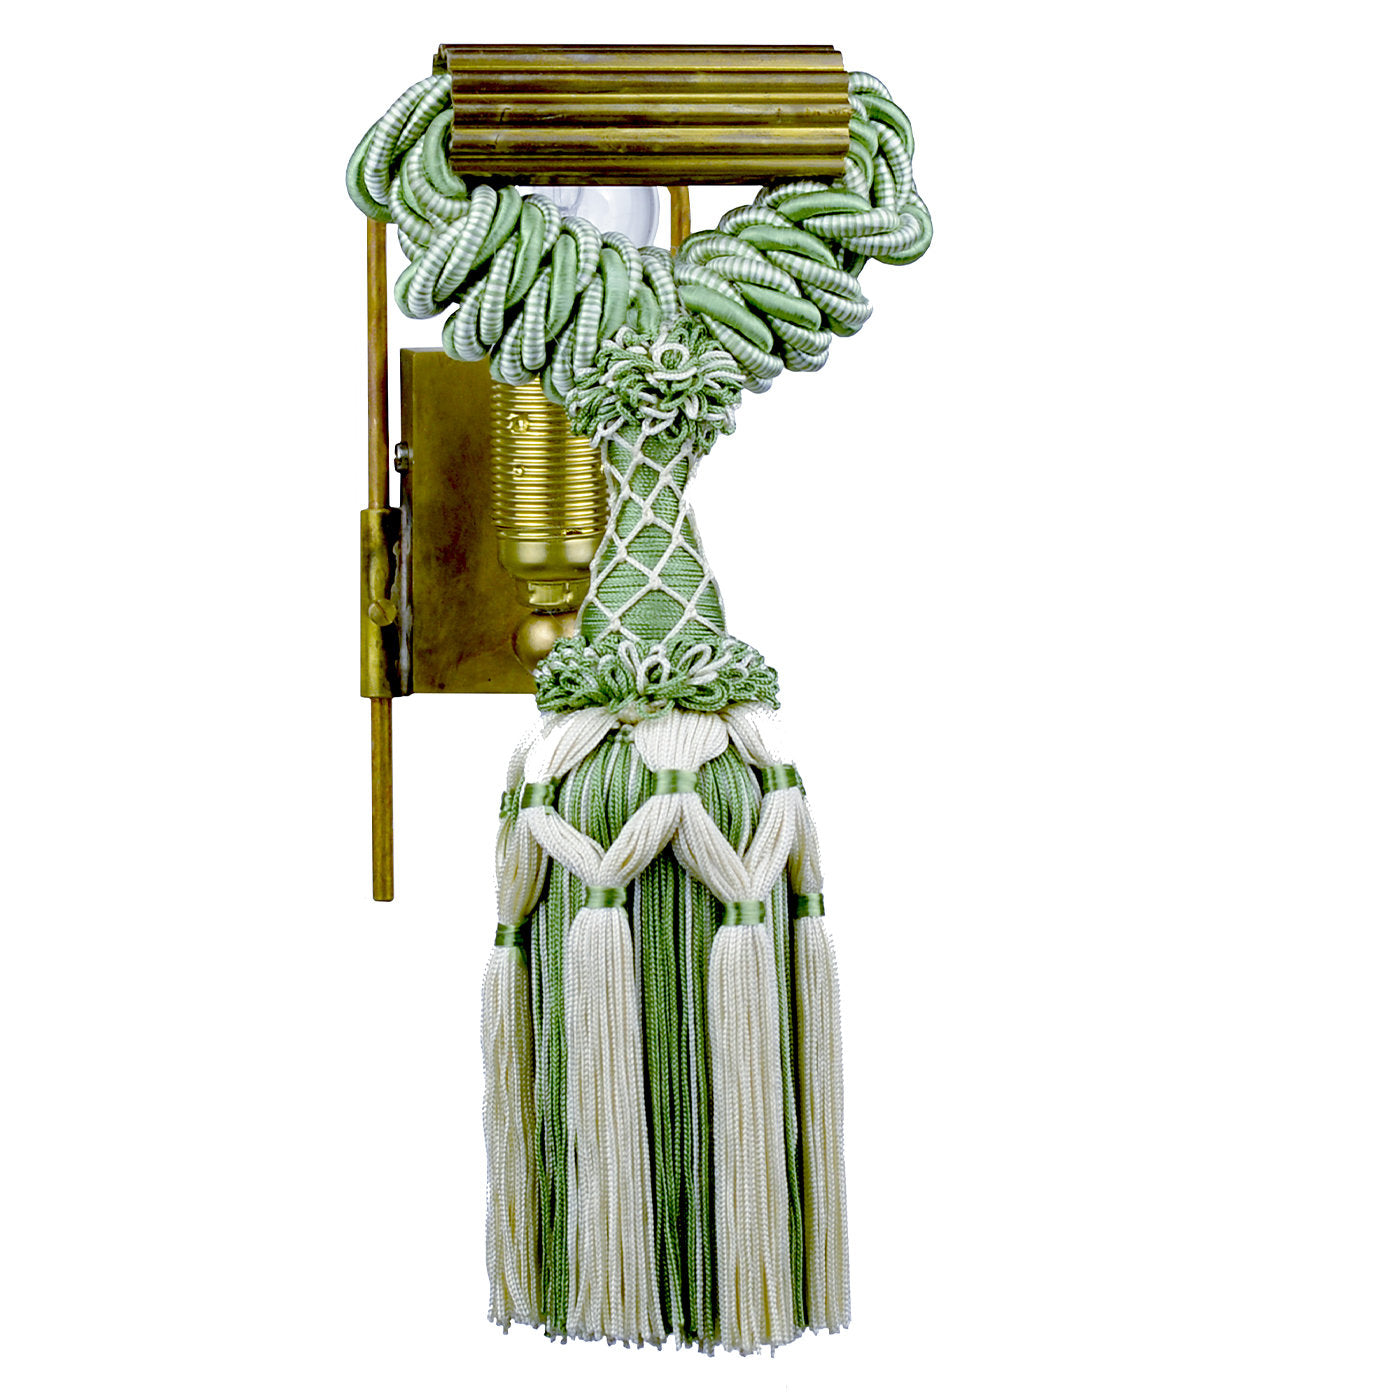 Applique Changeant Imperiale White and Sage Green Wall Lamp - Alternative view 1